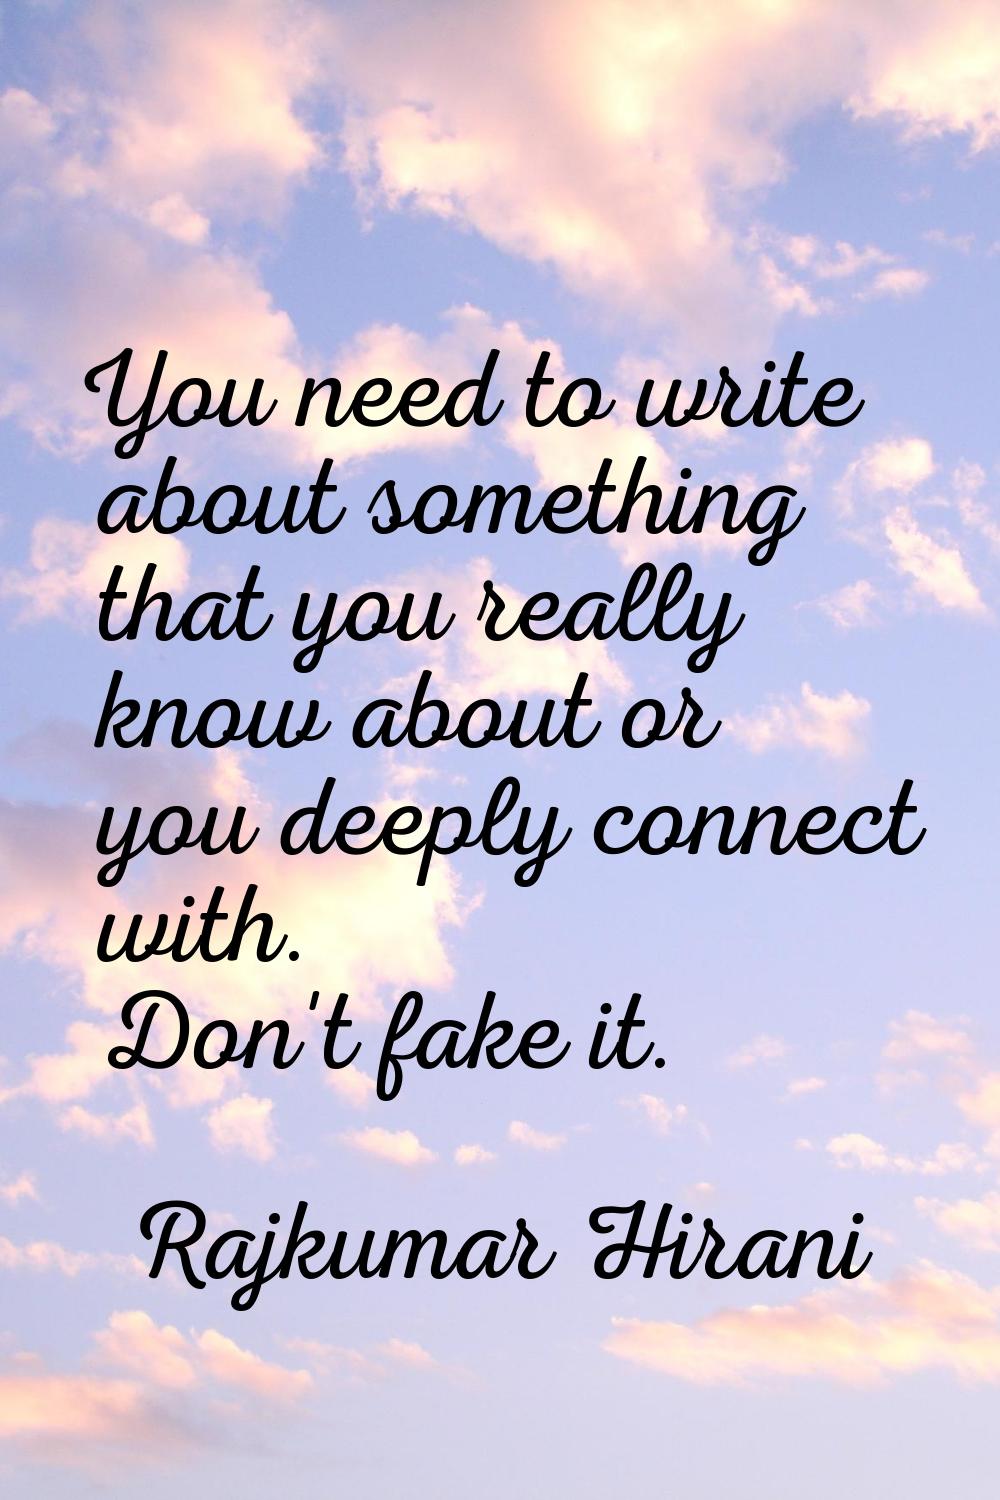 You need to write about something that you really know about or you deeply connect with. Don't fake